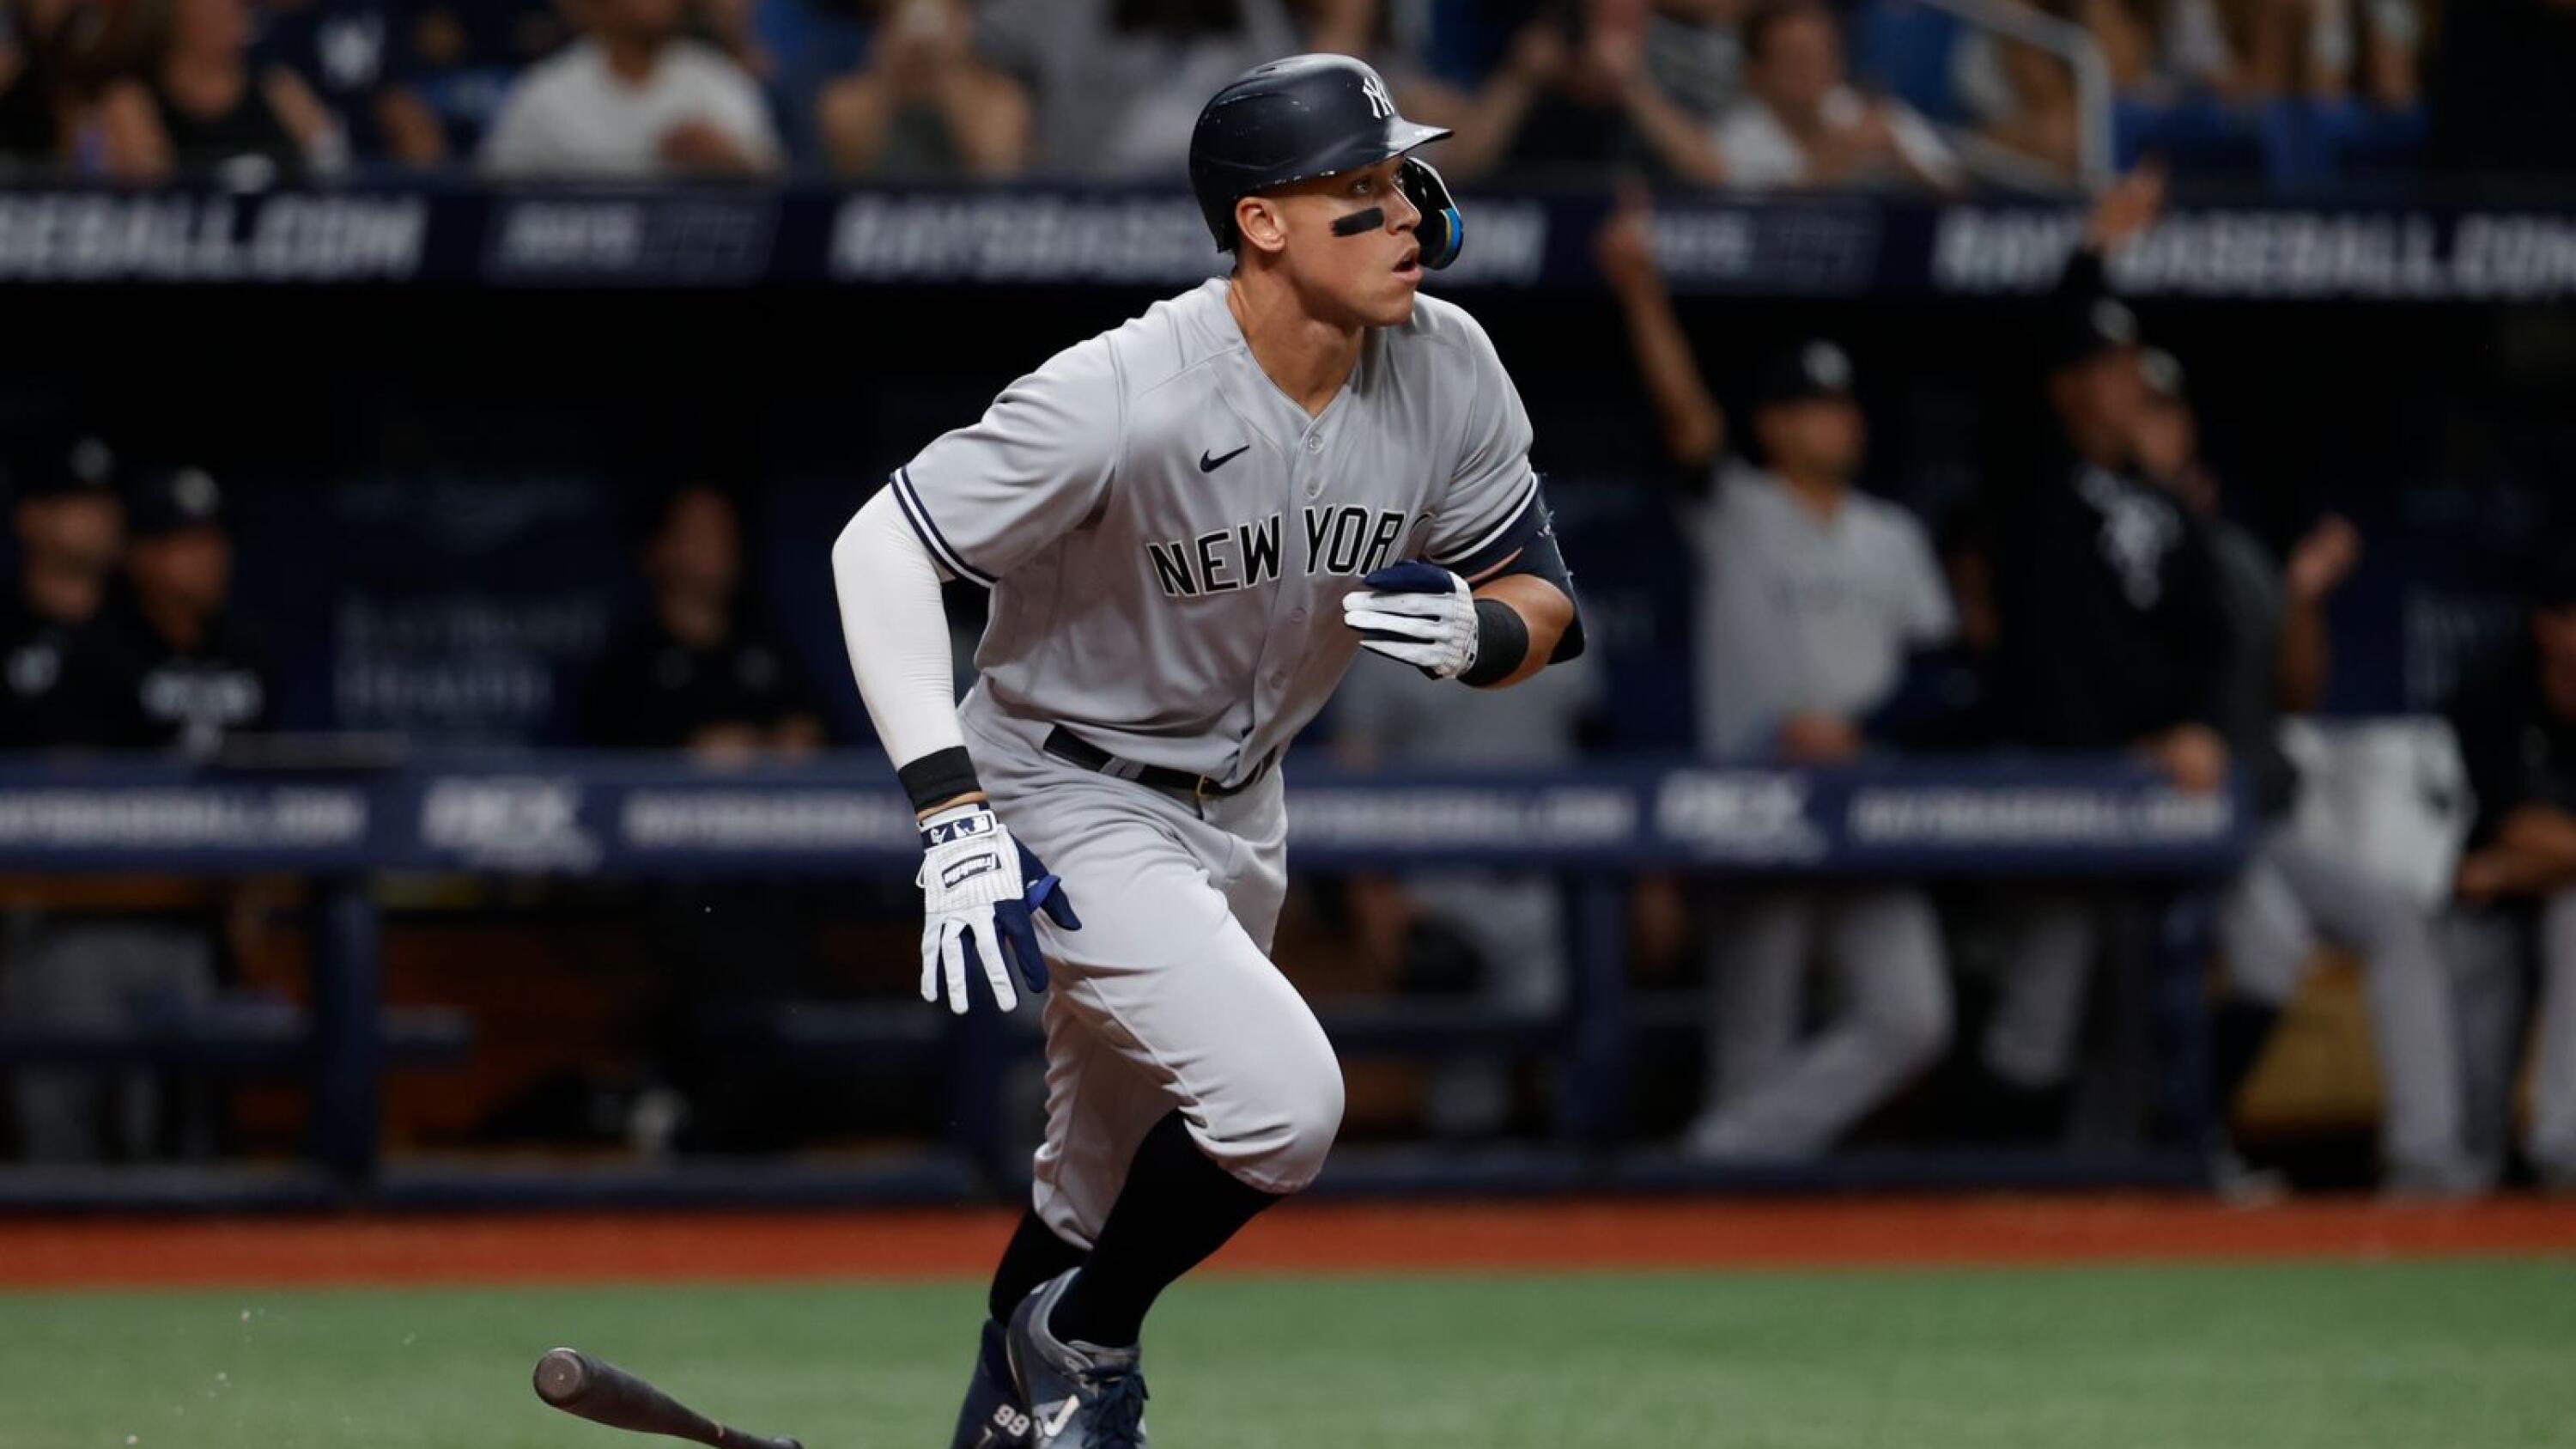 Rays beat Yankees 9-0 to move within 5 games in AL East